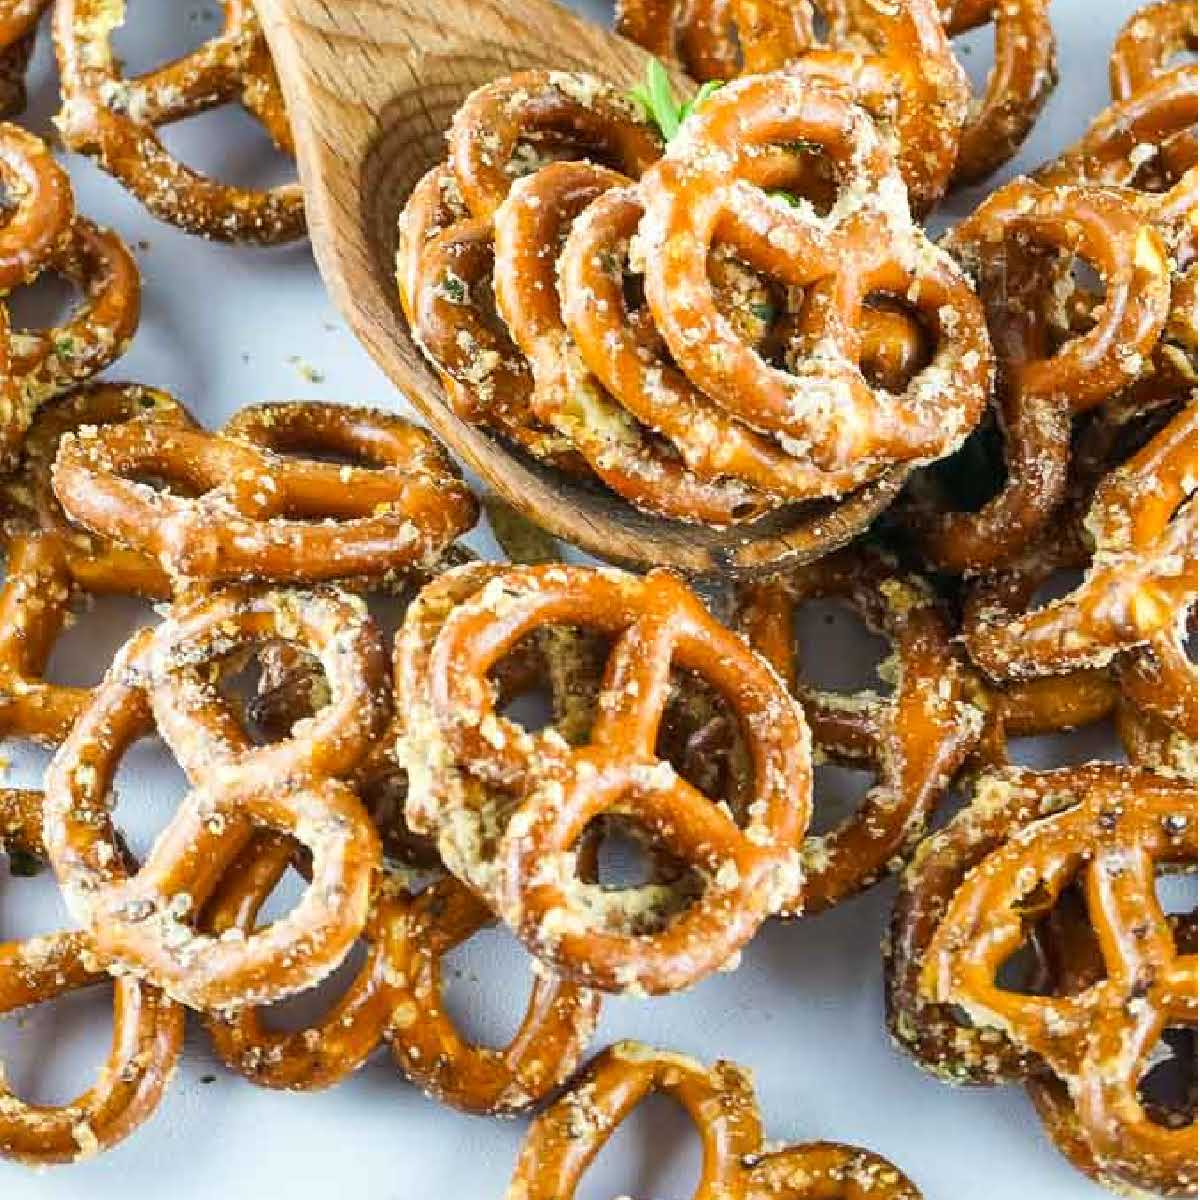 top close up view of baked ranched pretzels with wooden spoon.